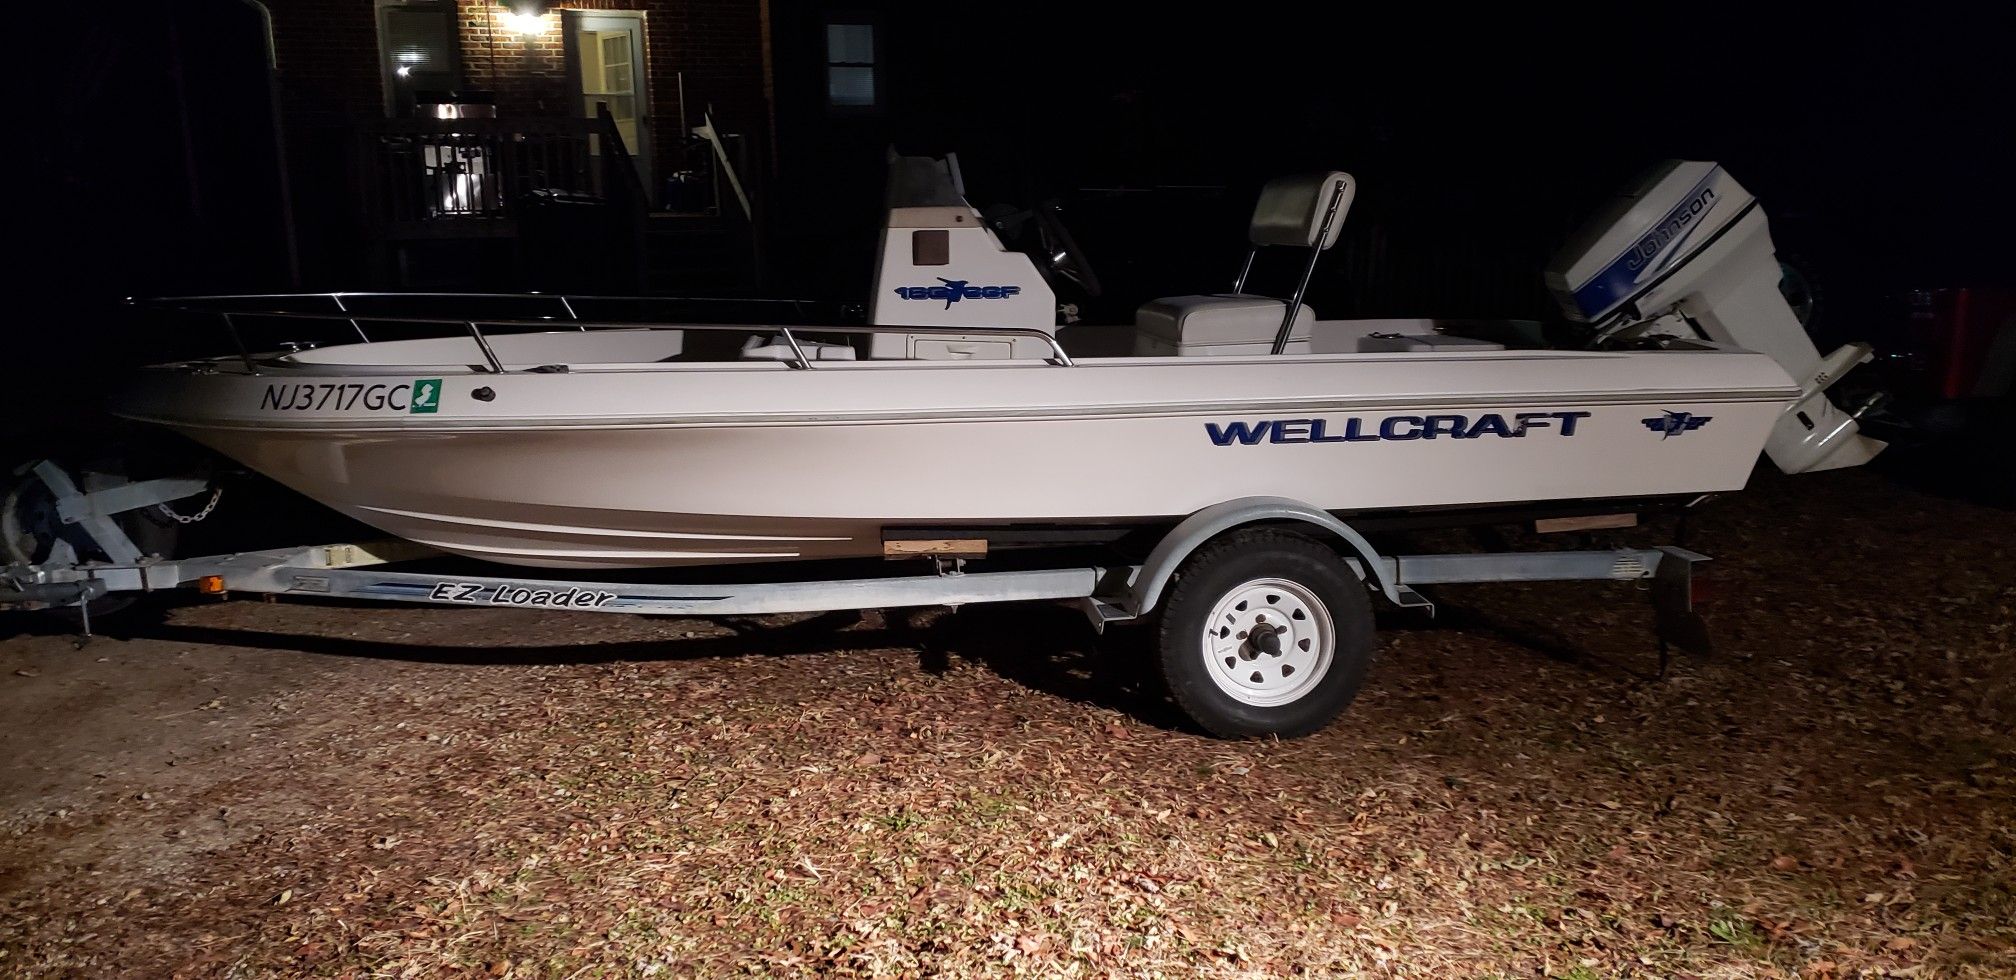 97 wellcraft 16ft center console boat